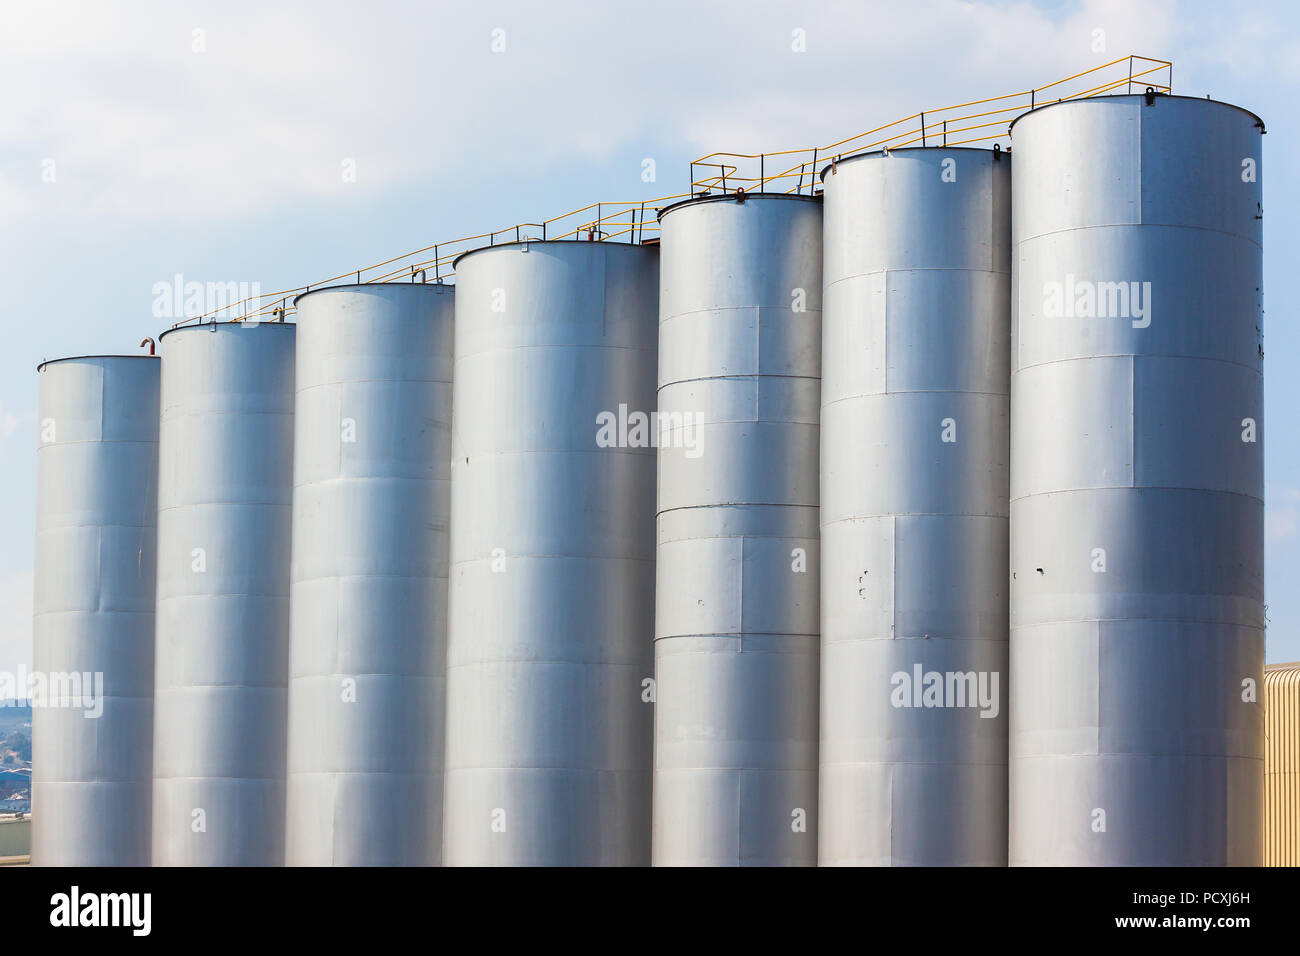 Seven steel silver painted silo tall storage tanks with walkway on top Stock Photo